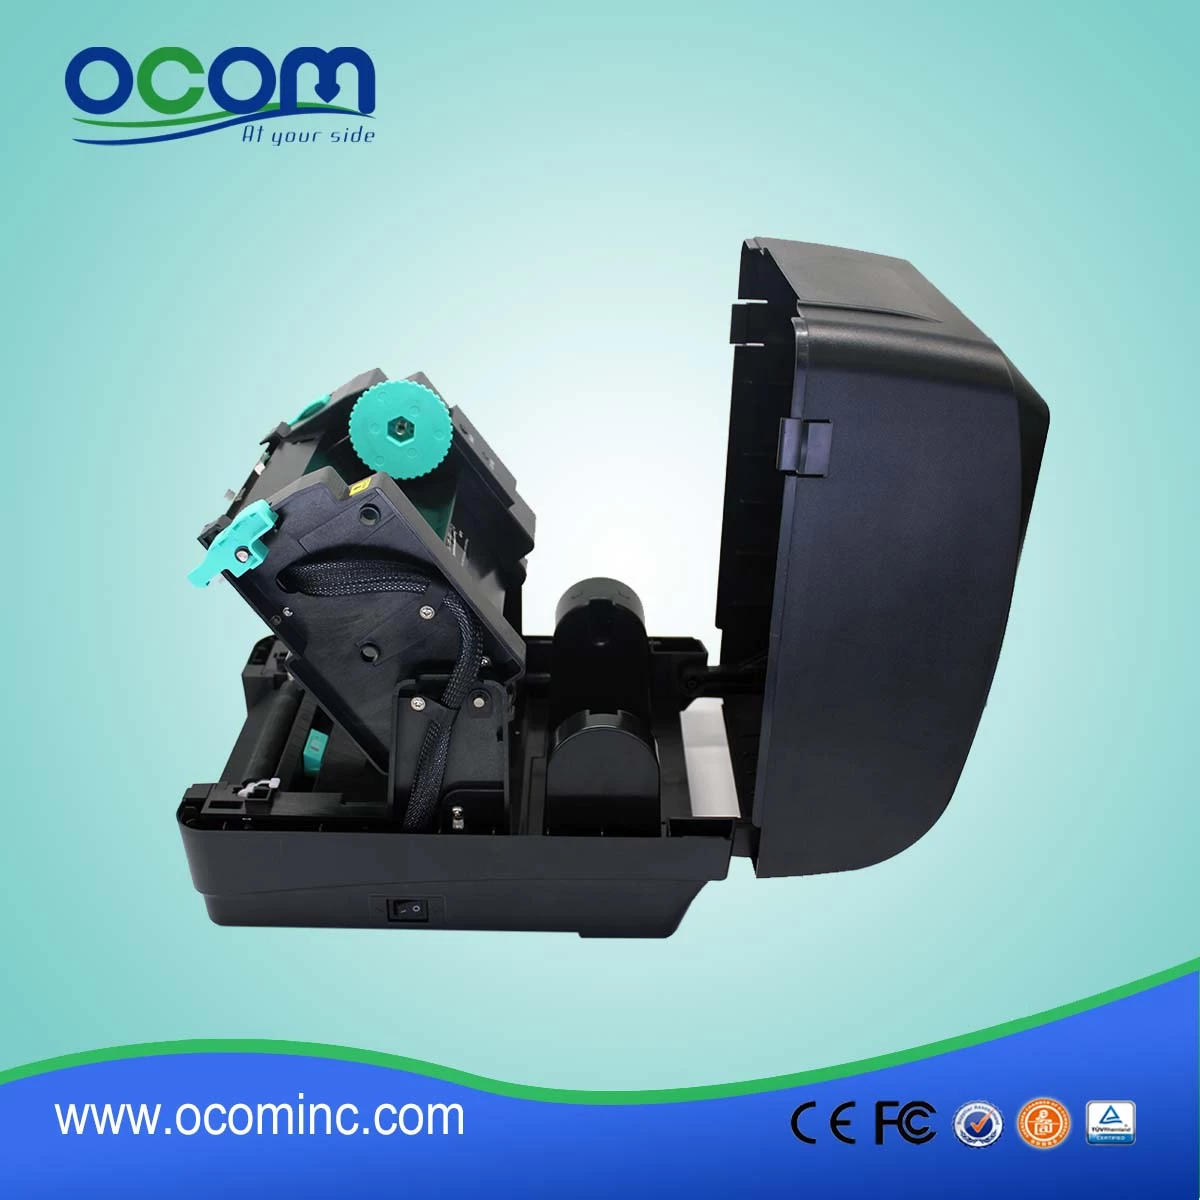 (OCBP-004) 4 Inch Thermal Transfer and Direct Thermal Barcode Label Printer